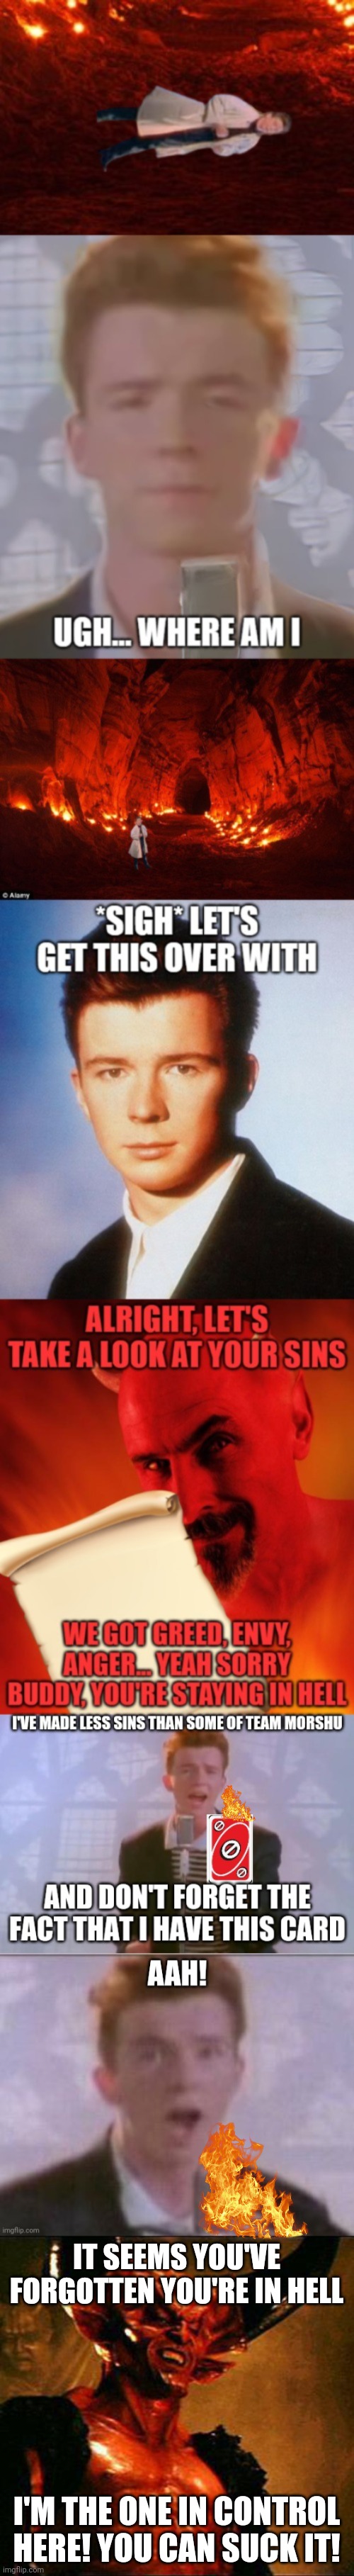 And yet, Rick Astley is in hell | IT SEEMS YOU'VE FORGOTTEN YOU'RE IN HELL; I'M THE ONE IN CONTROL HERE! YOU CAN SUCK IT! | image tagged in satan | made w/ Imgflip meme maker